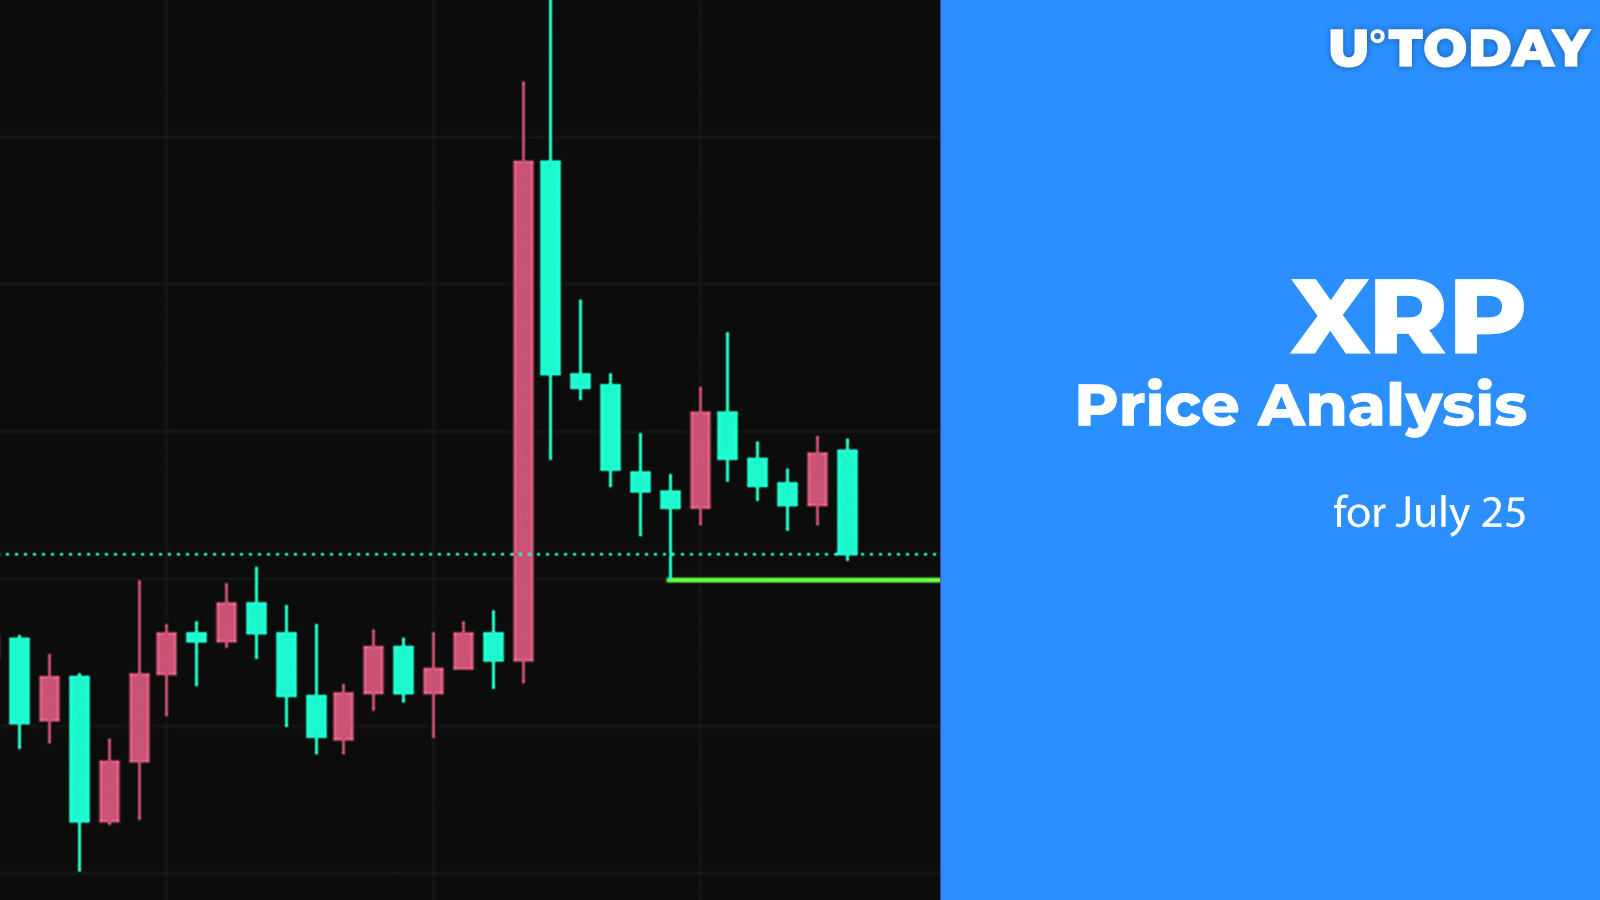 XRP Price Analysis for July 25